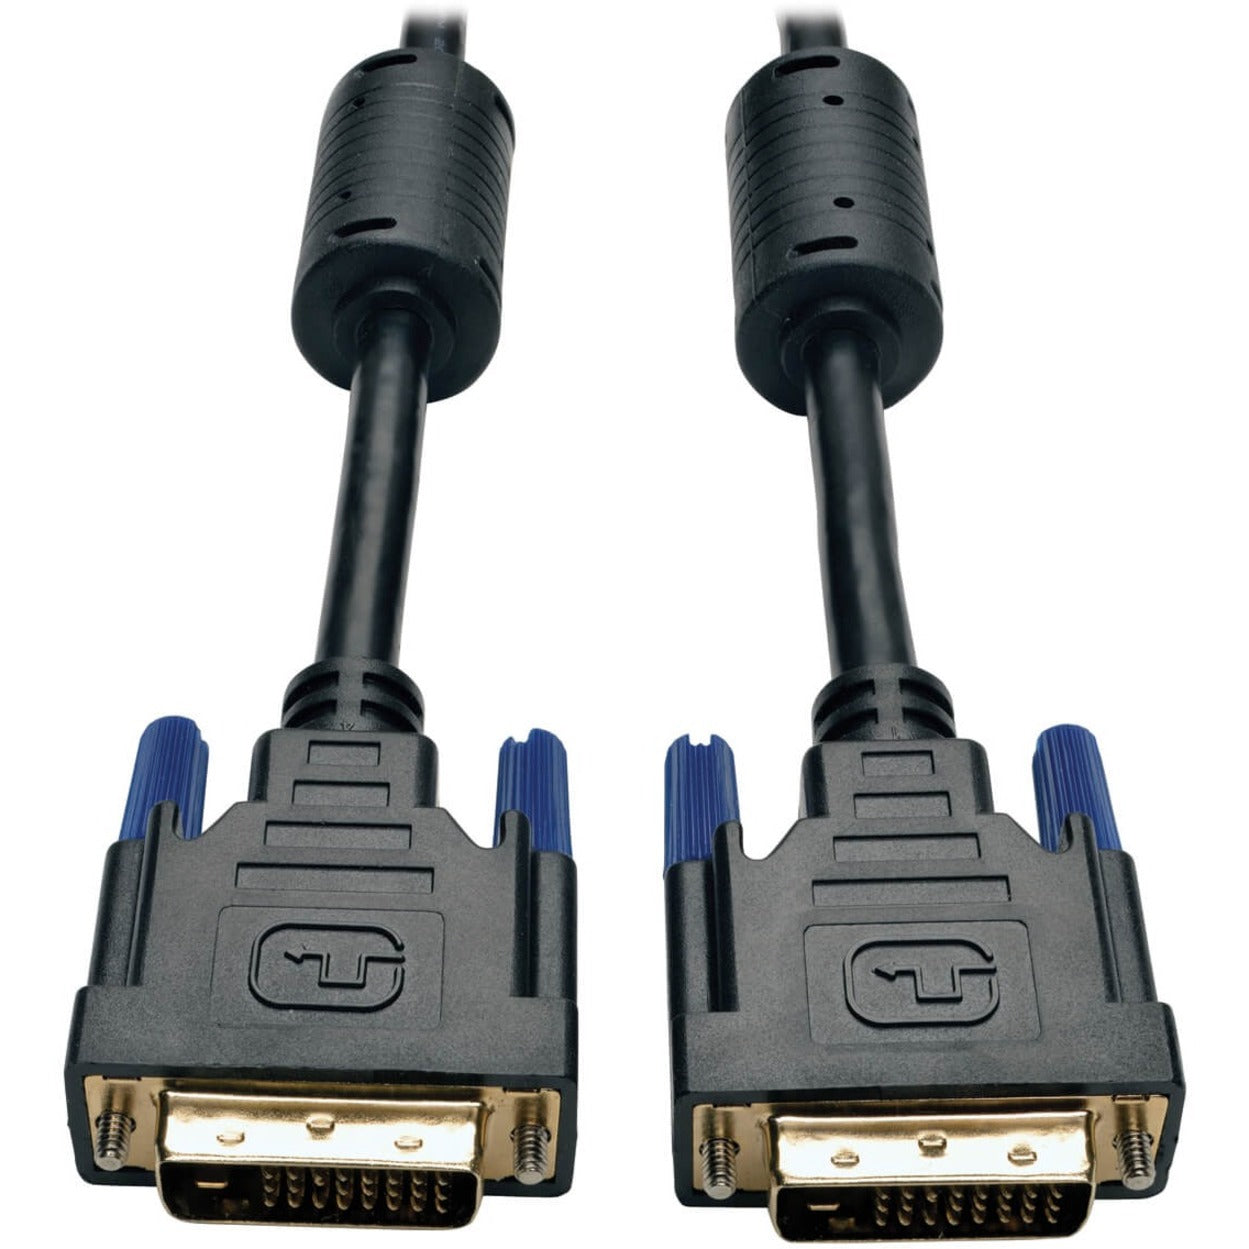 Tripp Lite P560-020 Display Cable, 20 ft DVI-D Dual-Link Digital Video Male to Male